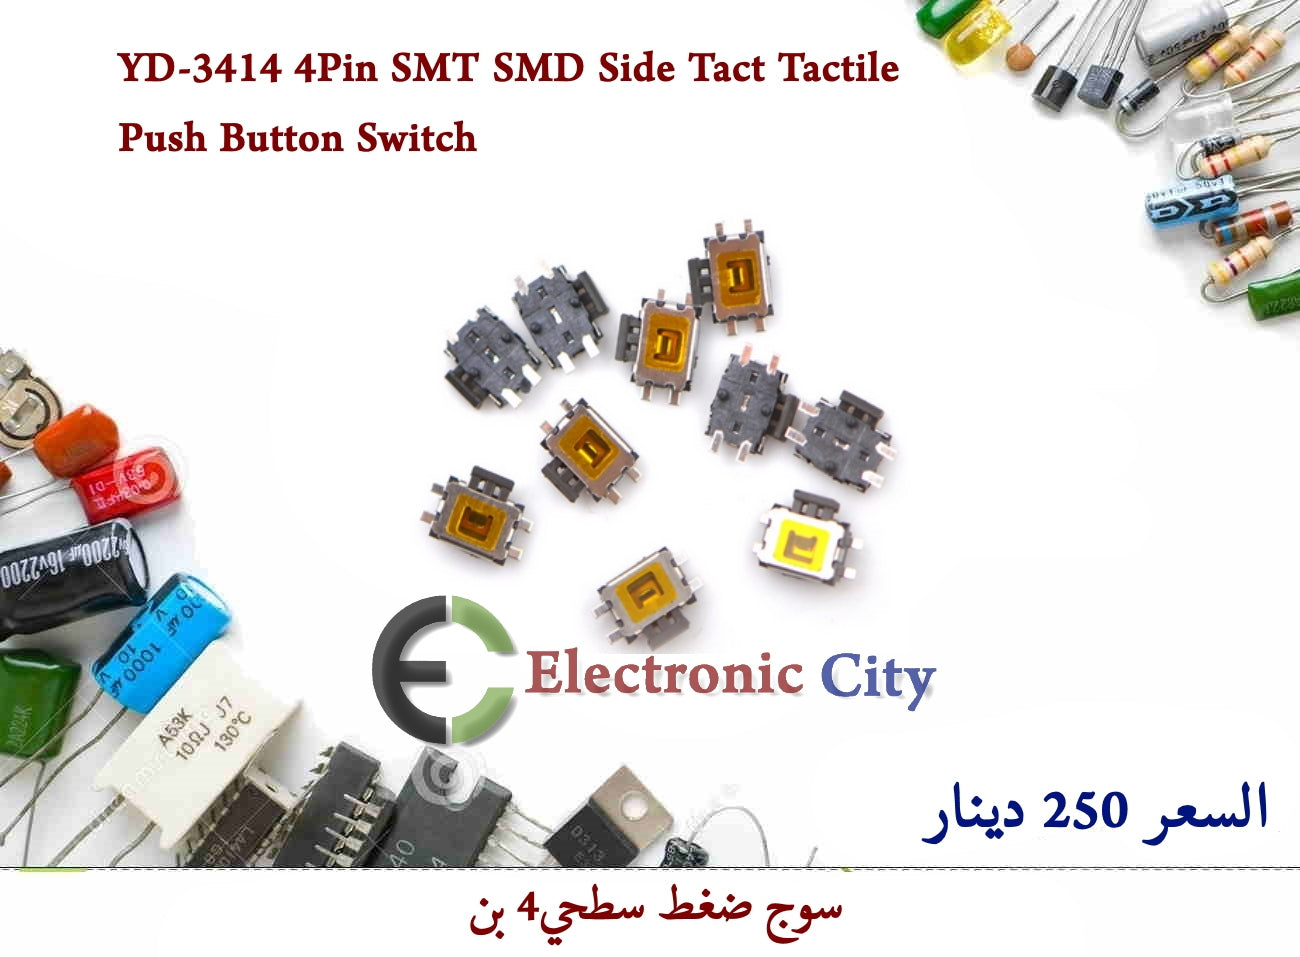 YD-3414 4Pin SMT SMD Side Tact Tactile Push Button Switch